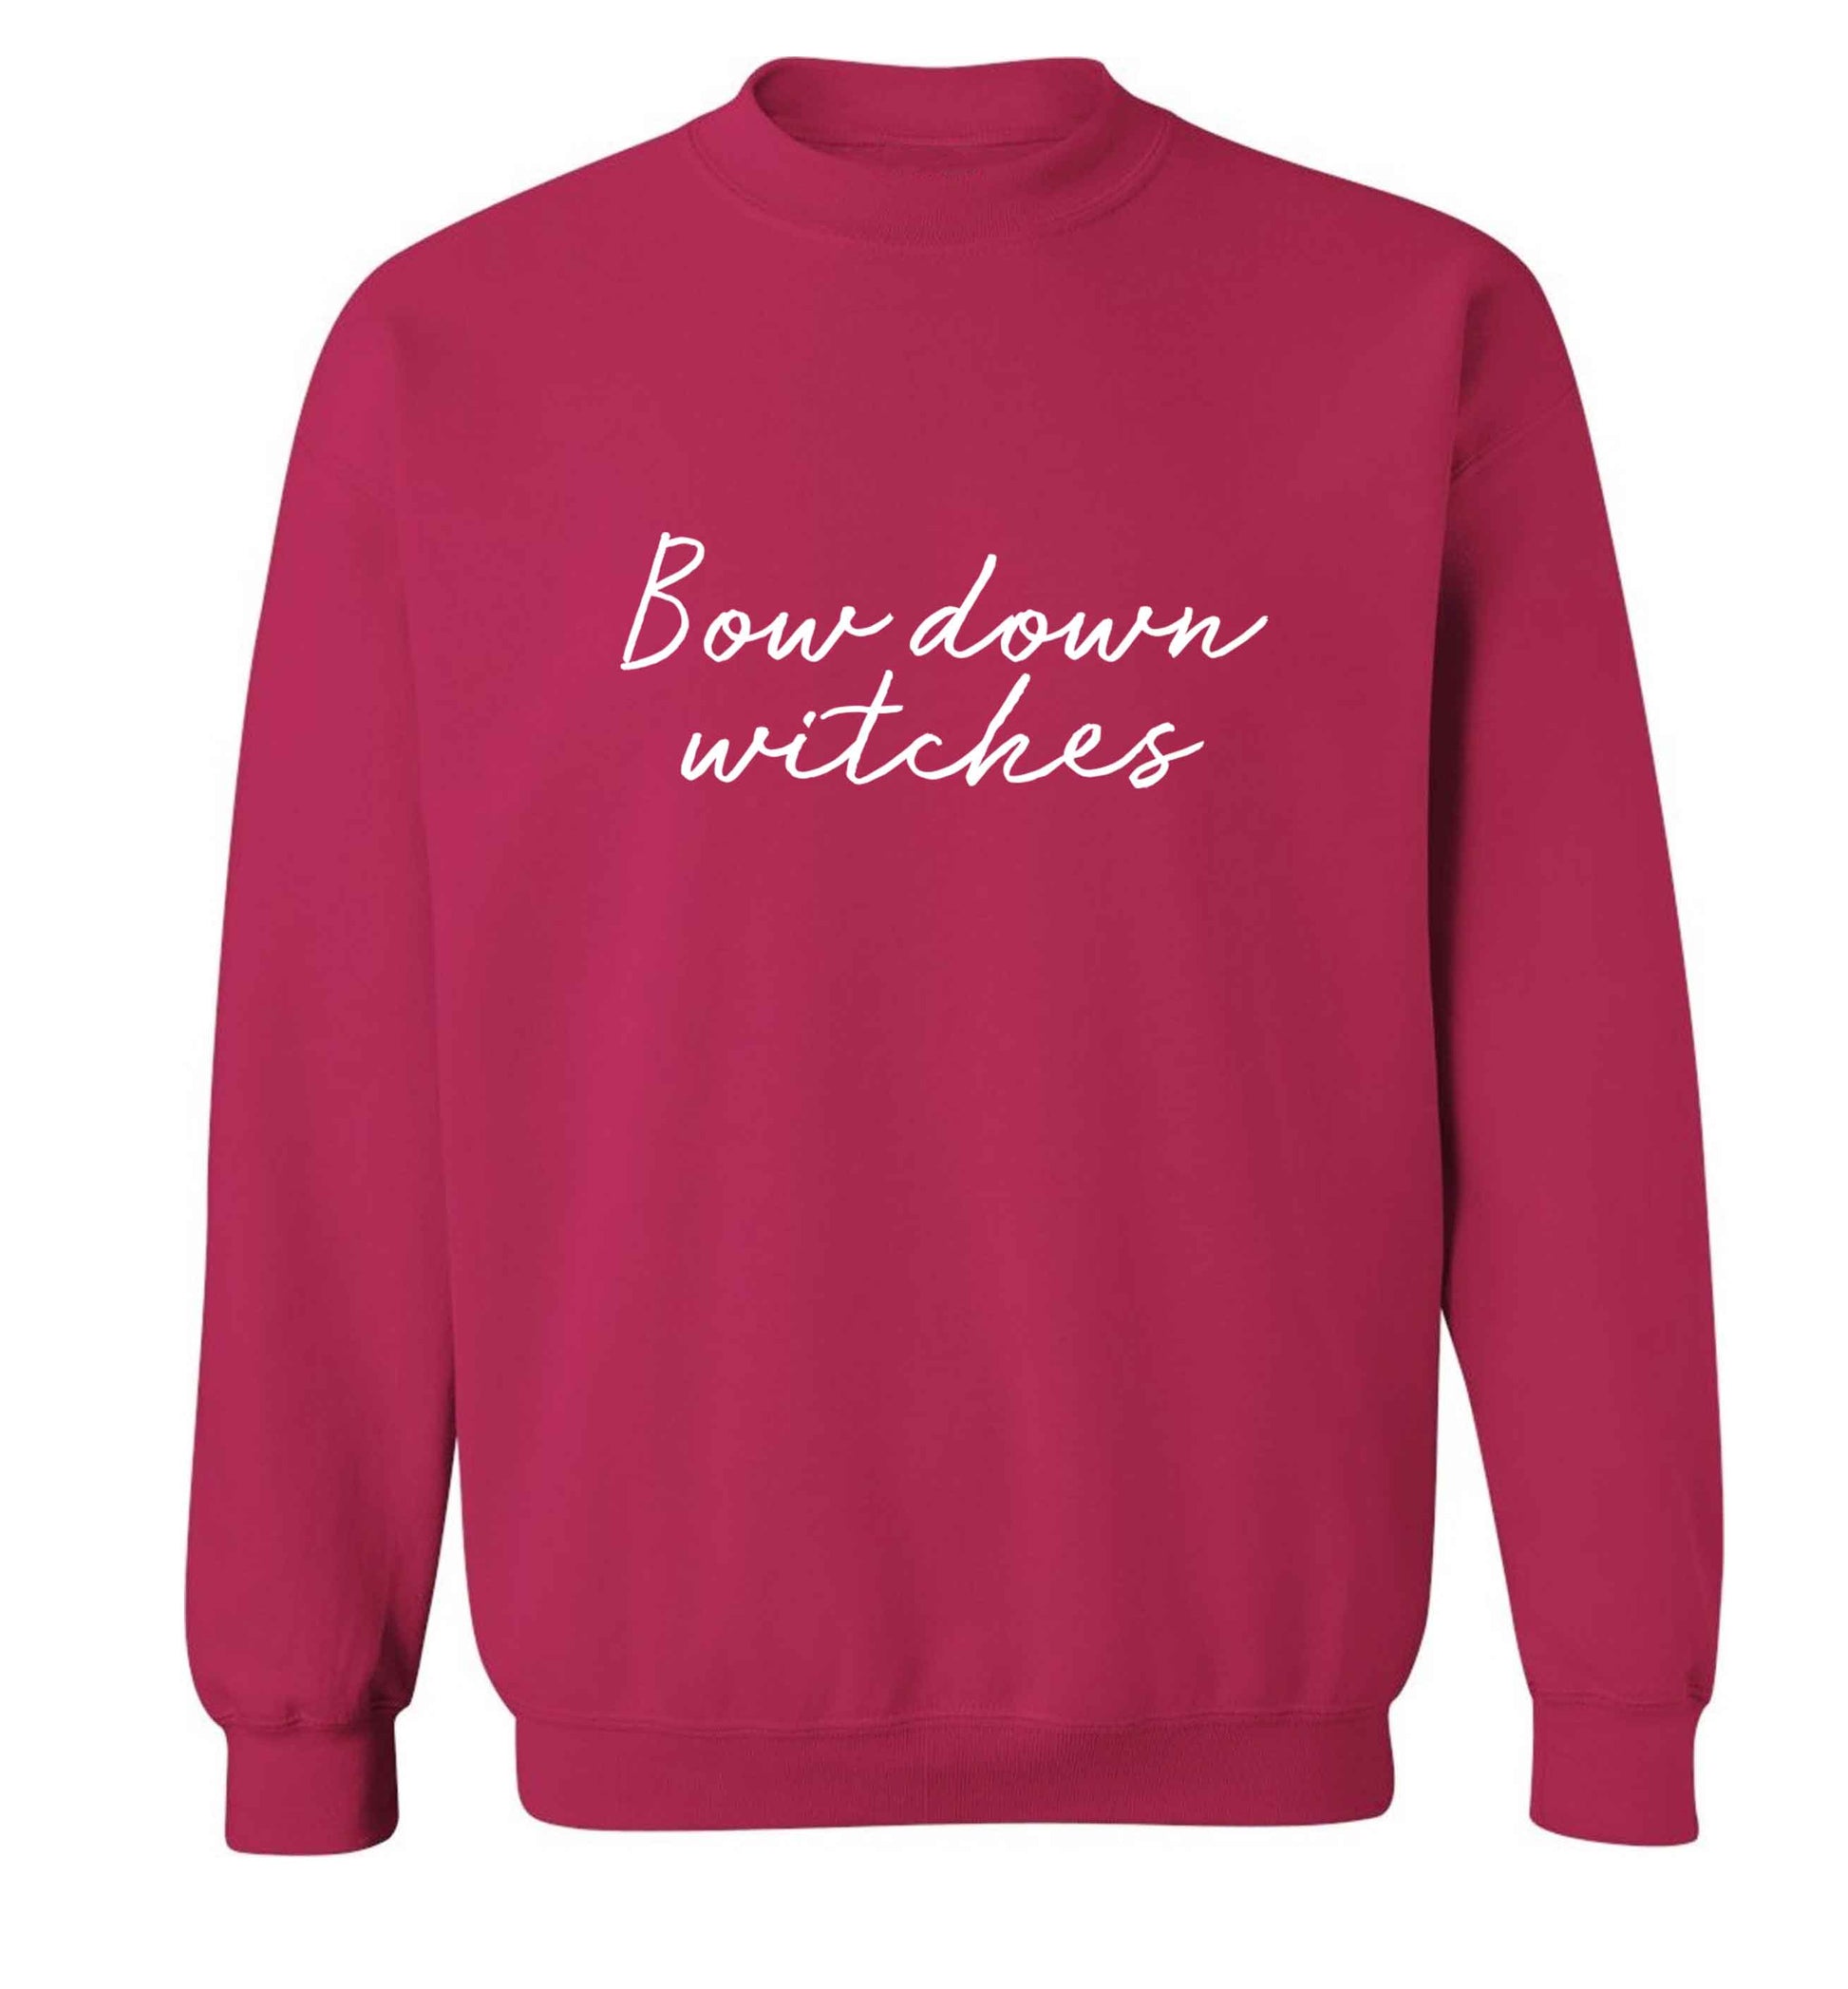 Bow down witches adult's unisex pink sweater 2XL